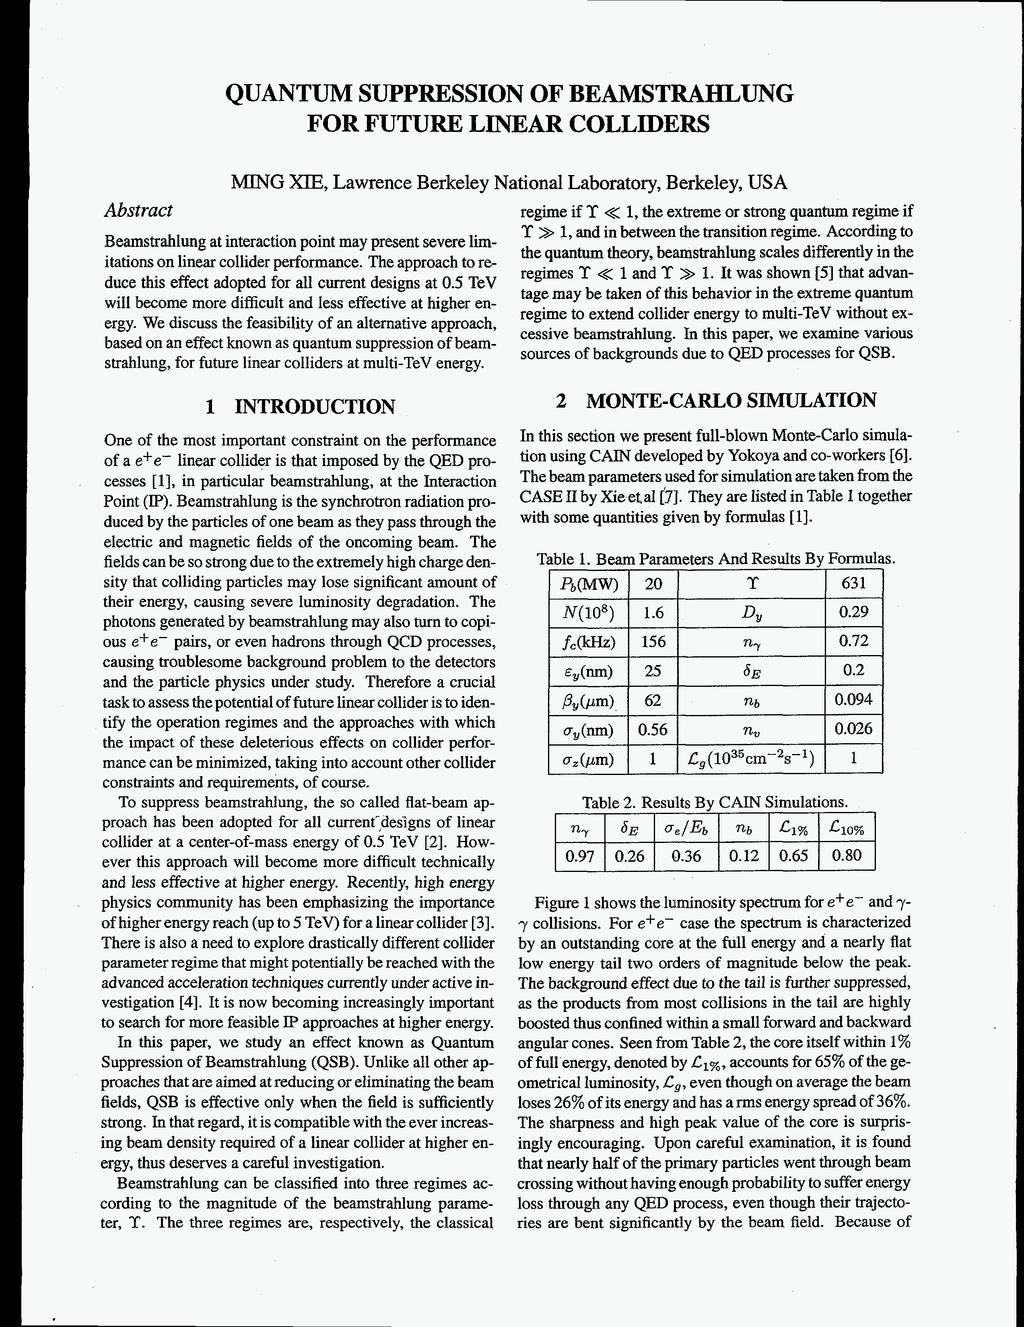 QUANTUM SUPPRESSION OF BEAMSTRAHLUNG FOR FUTURE LINEAR COLLIDERS MING XIE, Lawrence Berkeley National Laboratory, Berkeley, USA Abstract regime if T << 1,the extreme or strong quantum regime if T >>